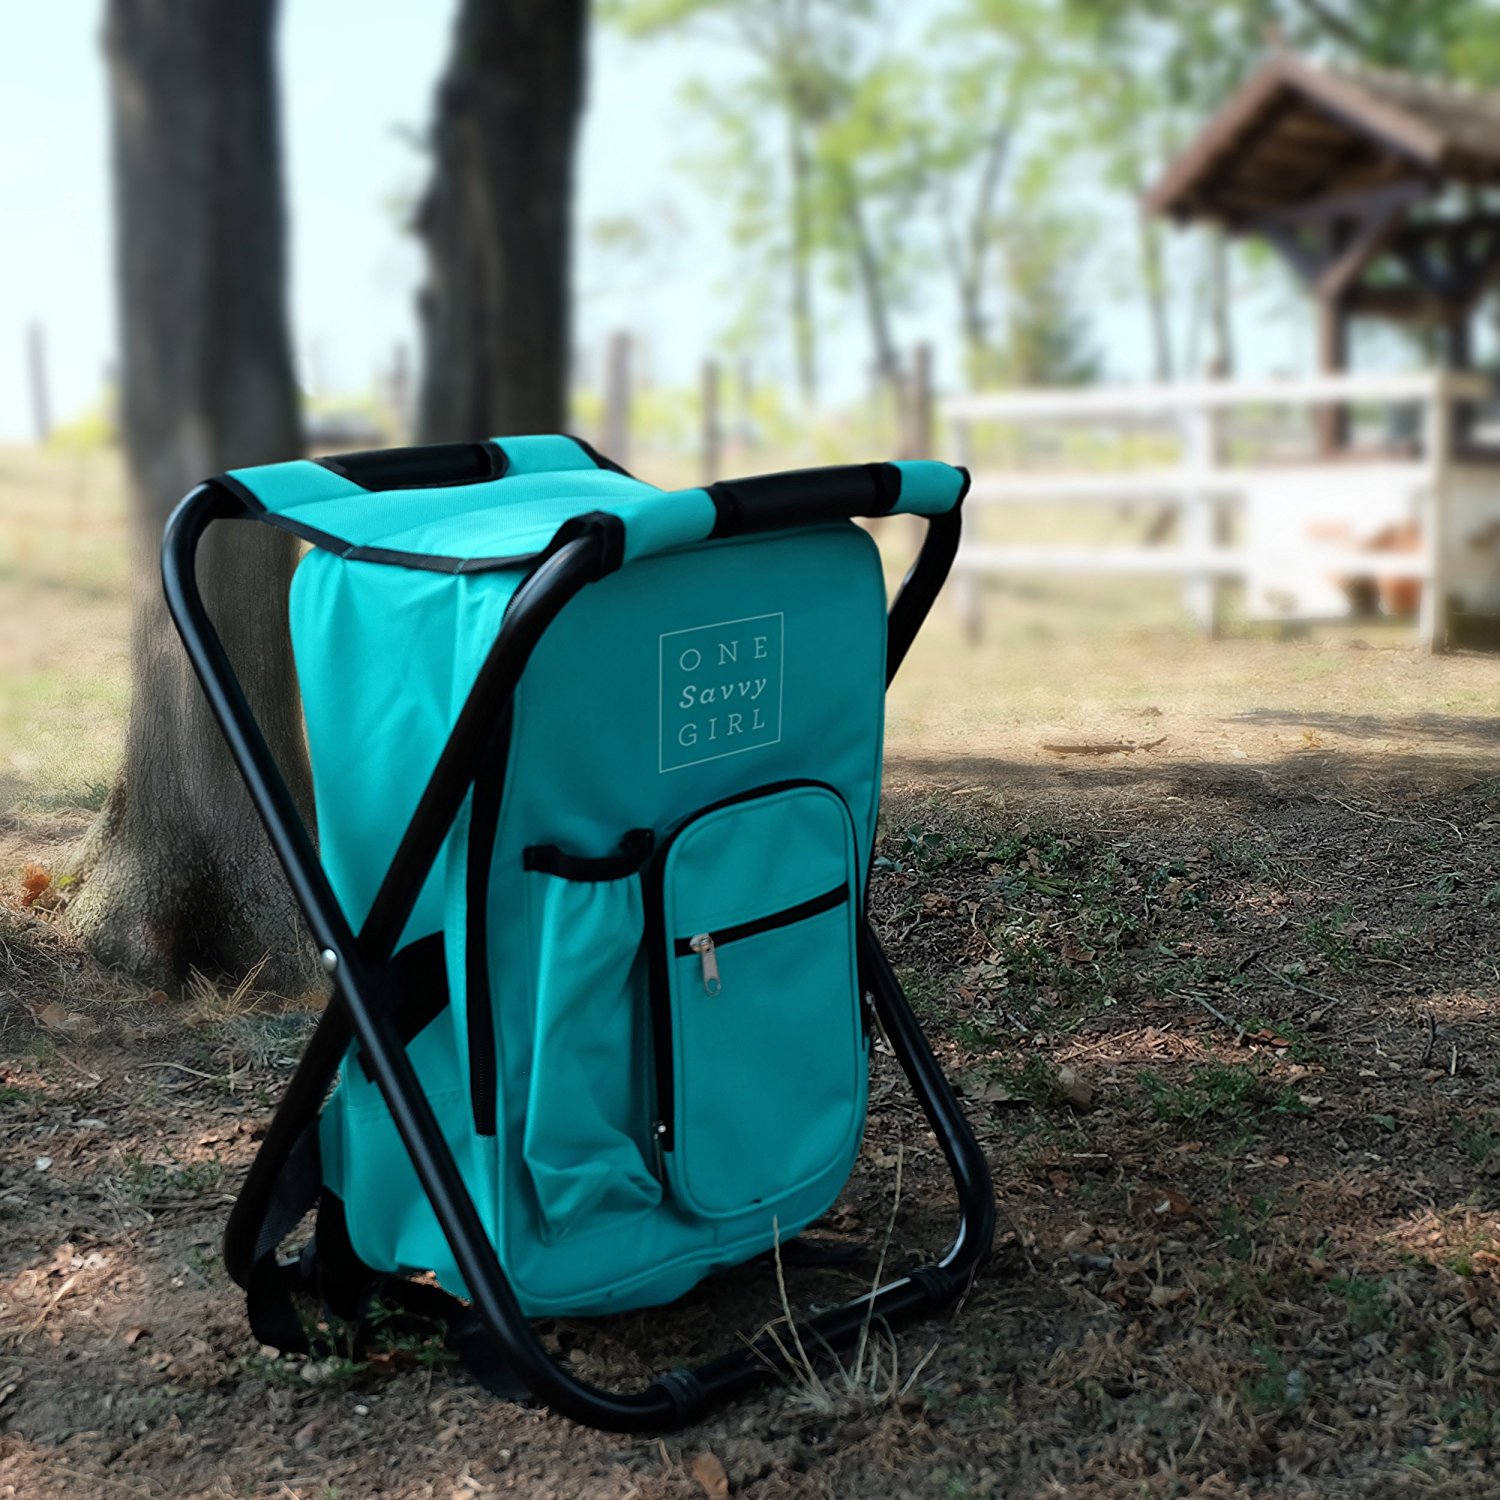 Review of One Savvy Girl Ultralight Backpack Cooler Chair - Compact Lightweight and Portable Folding Stool